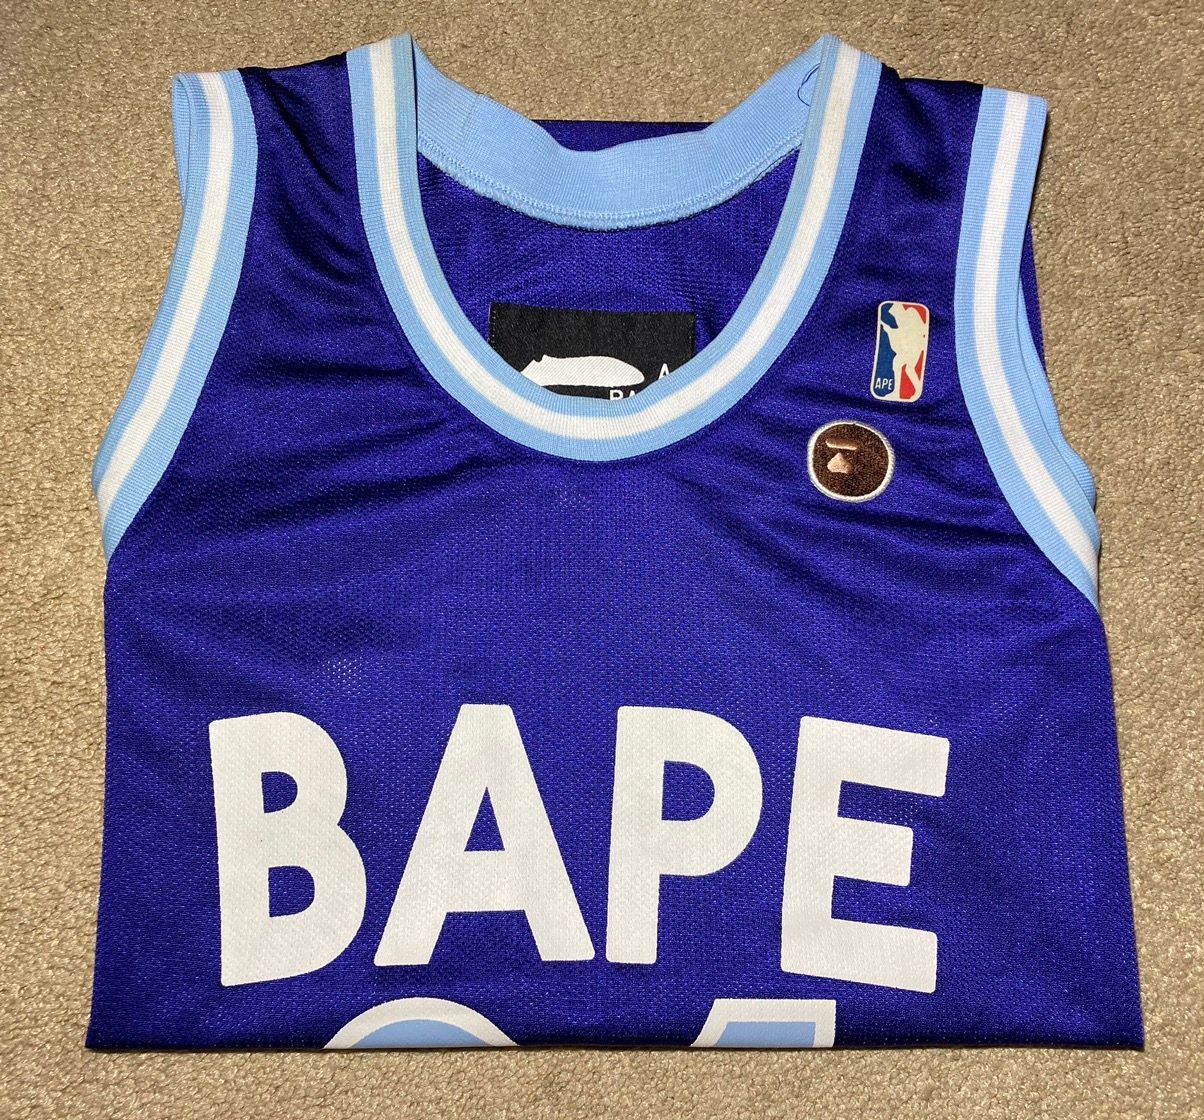 Pre-owned Bape 2004  Jersey Basketball Lakers Kobe Bryant 04 Ice Blue